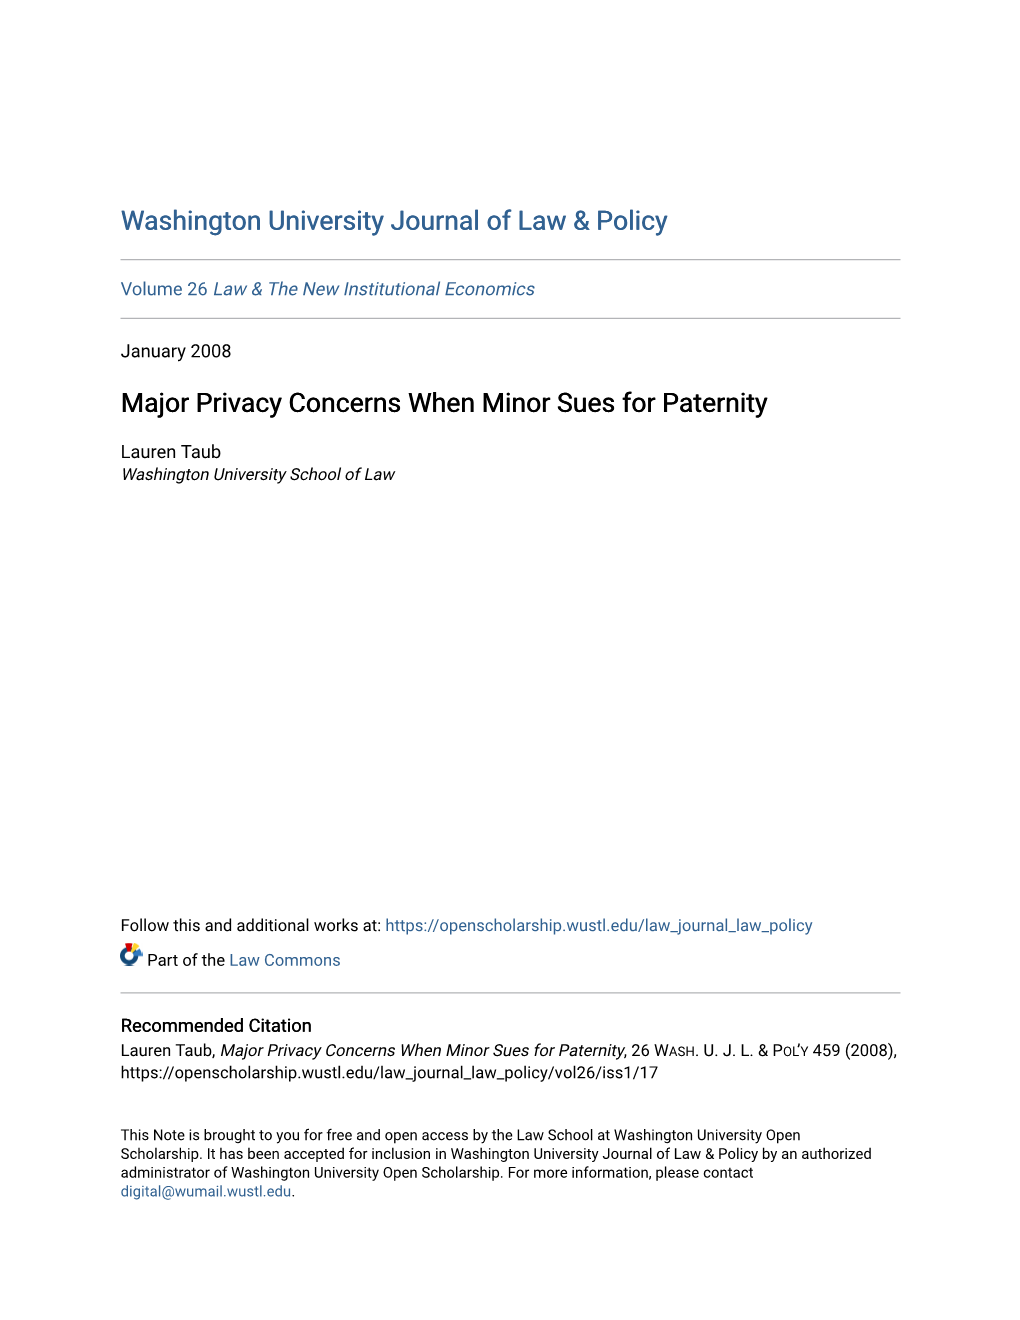 Major Privacy Concerns When Minor Sues for Paternity